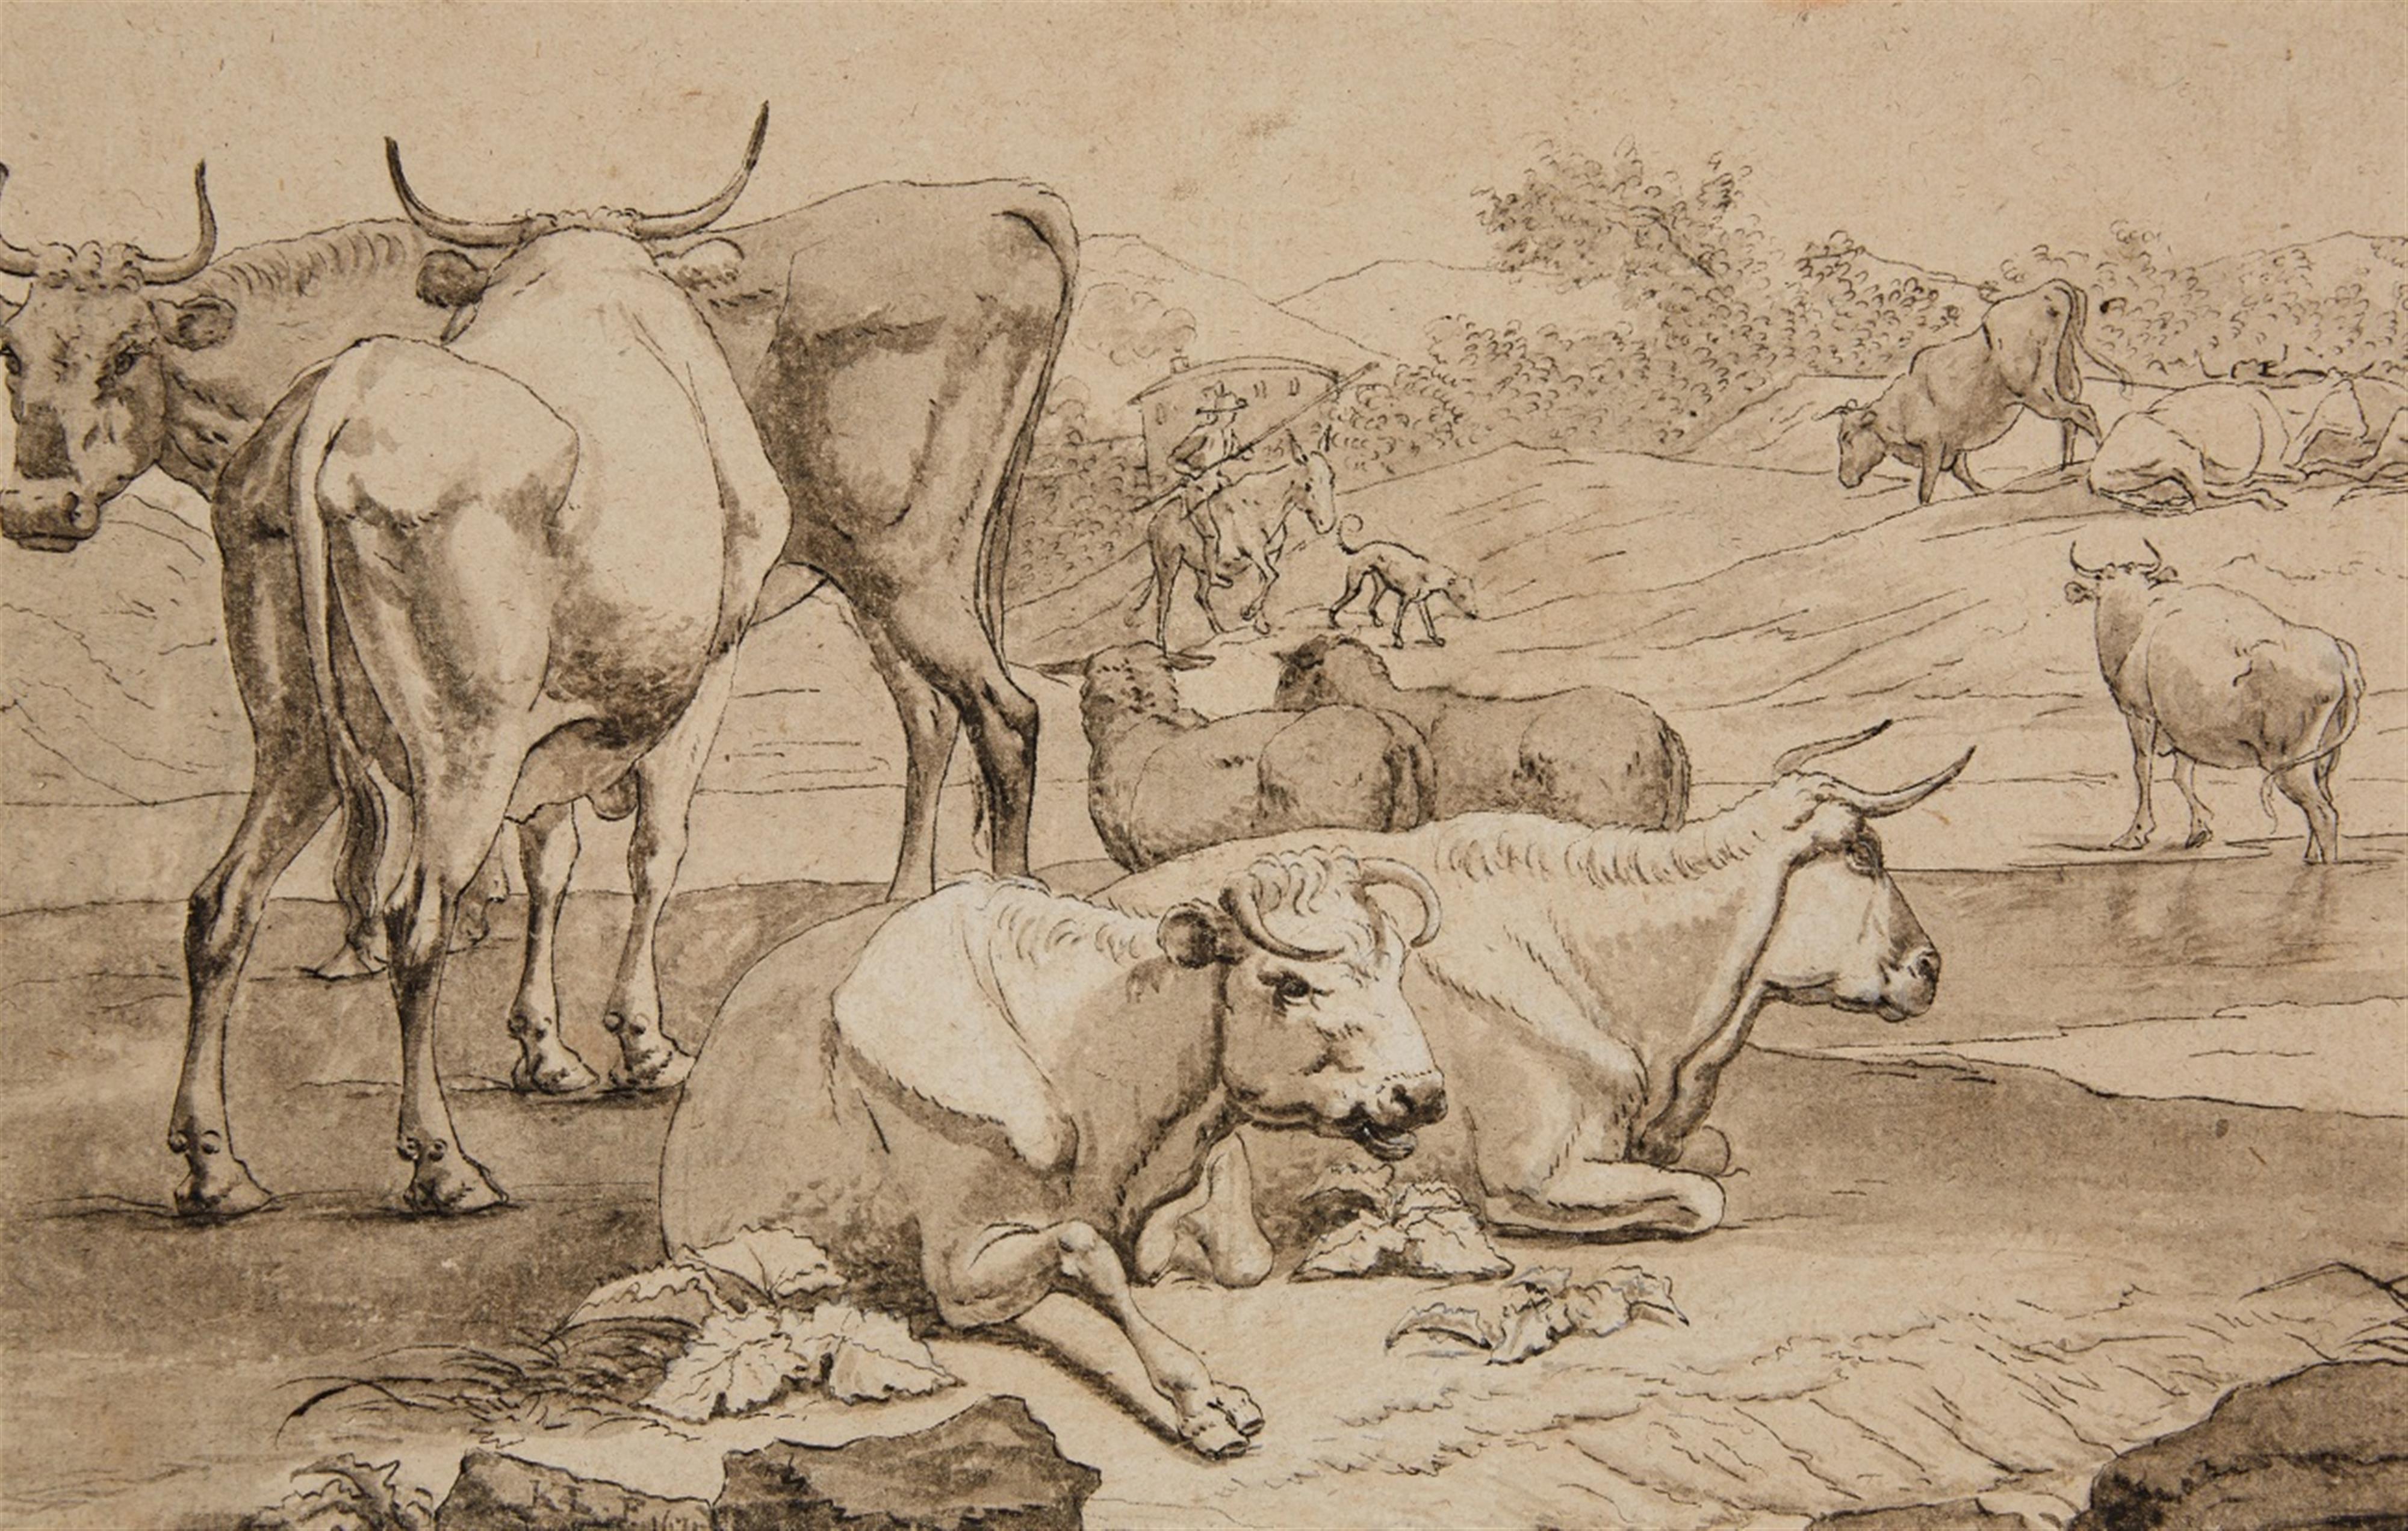 Netherlandish School 17th century - A Herd of Sheep and Cattle in a Southern Landscape - image-1